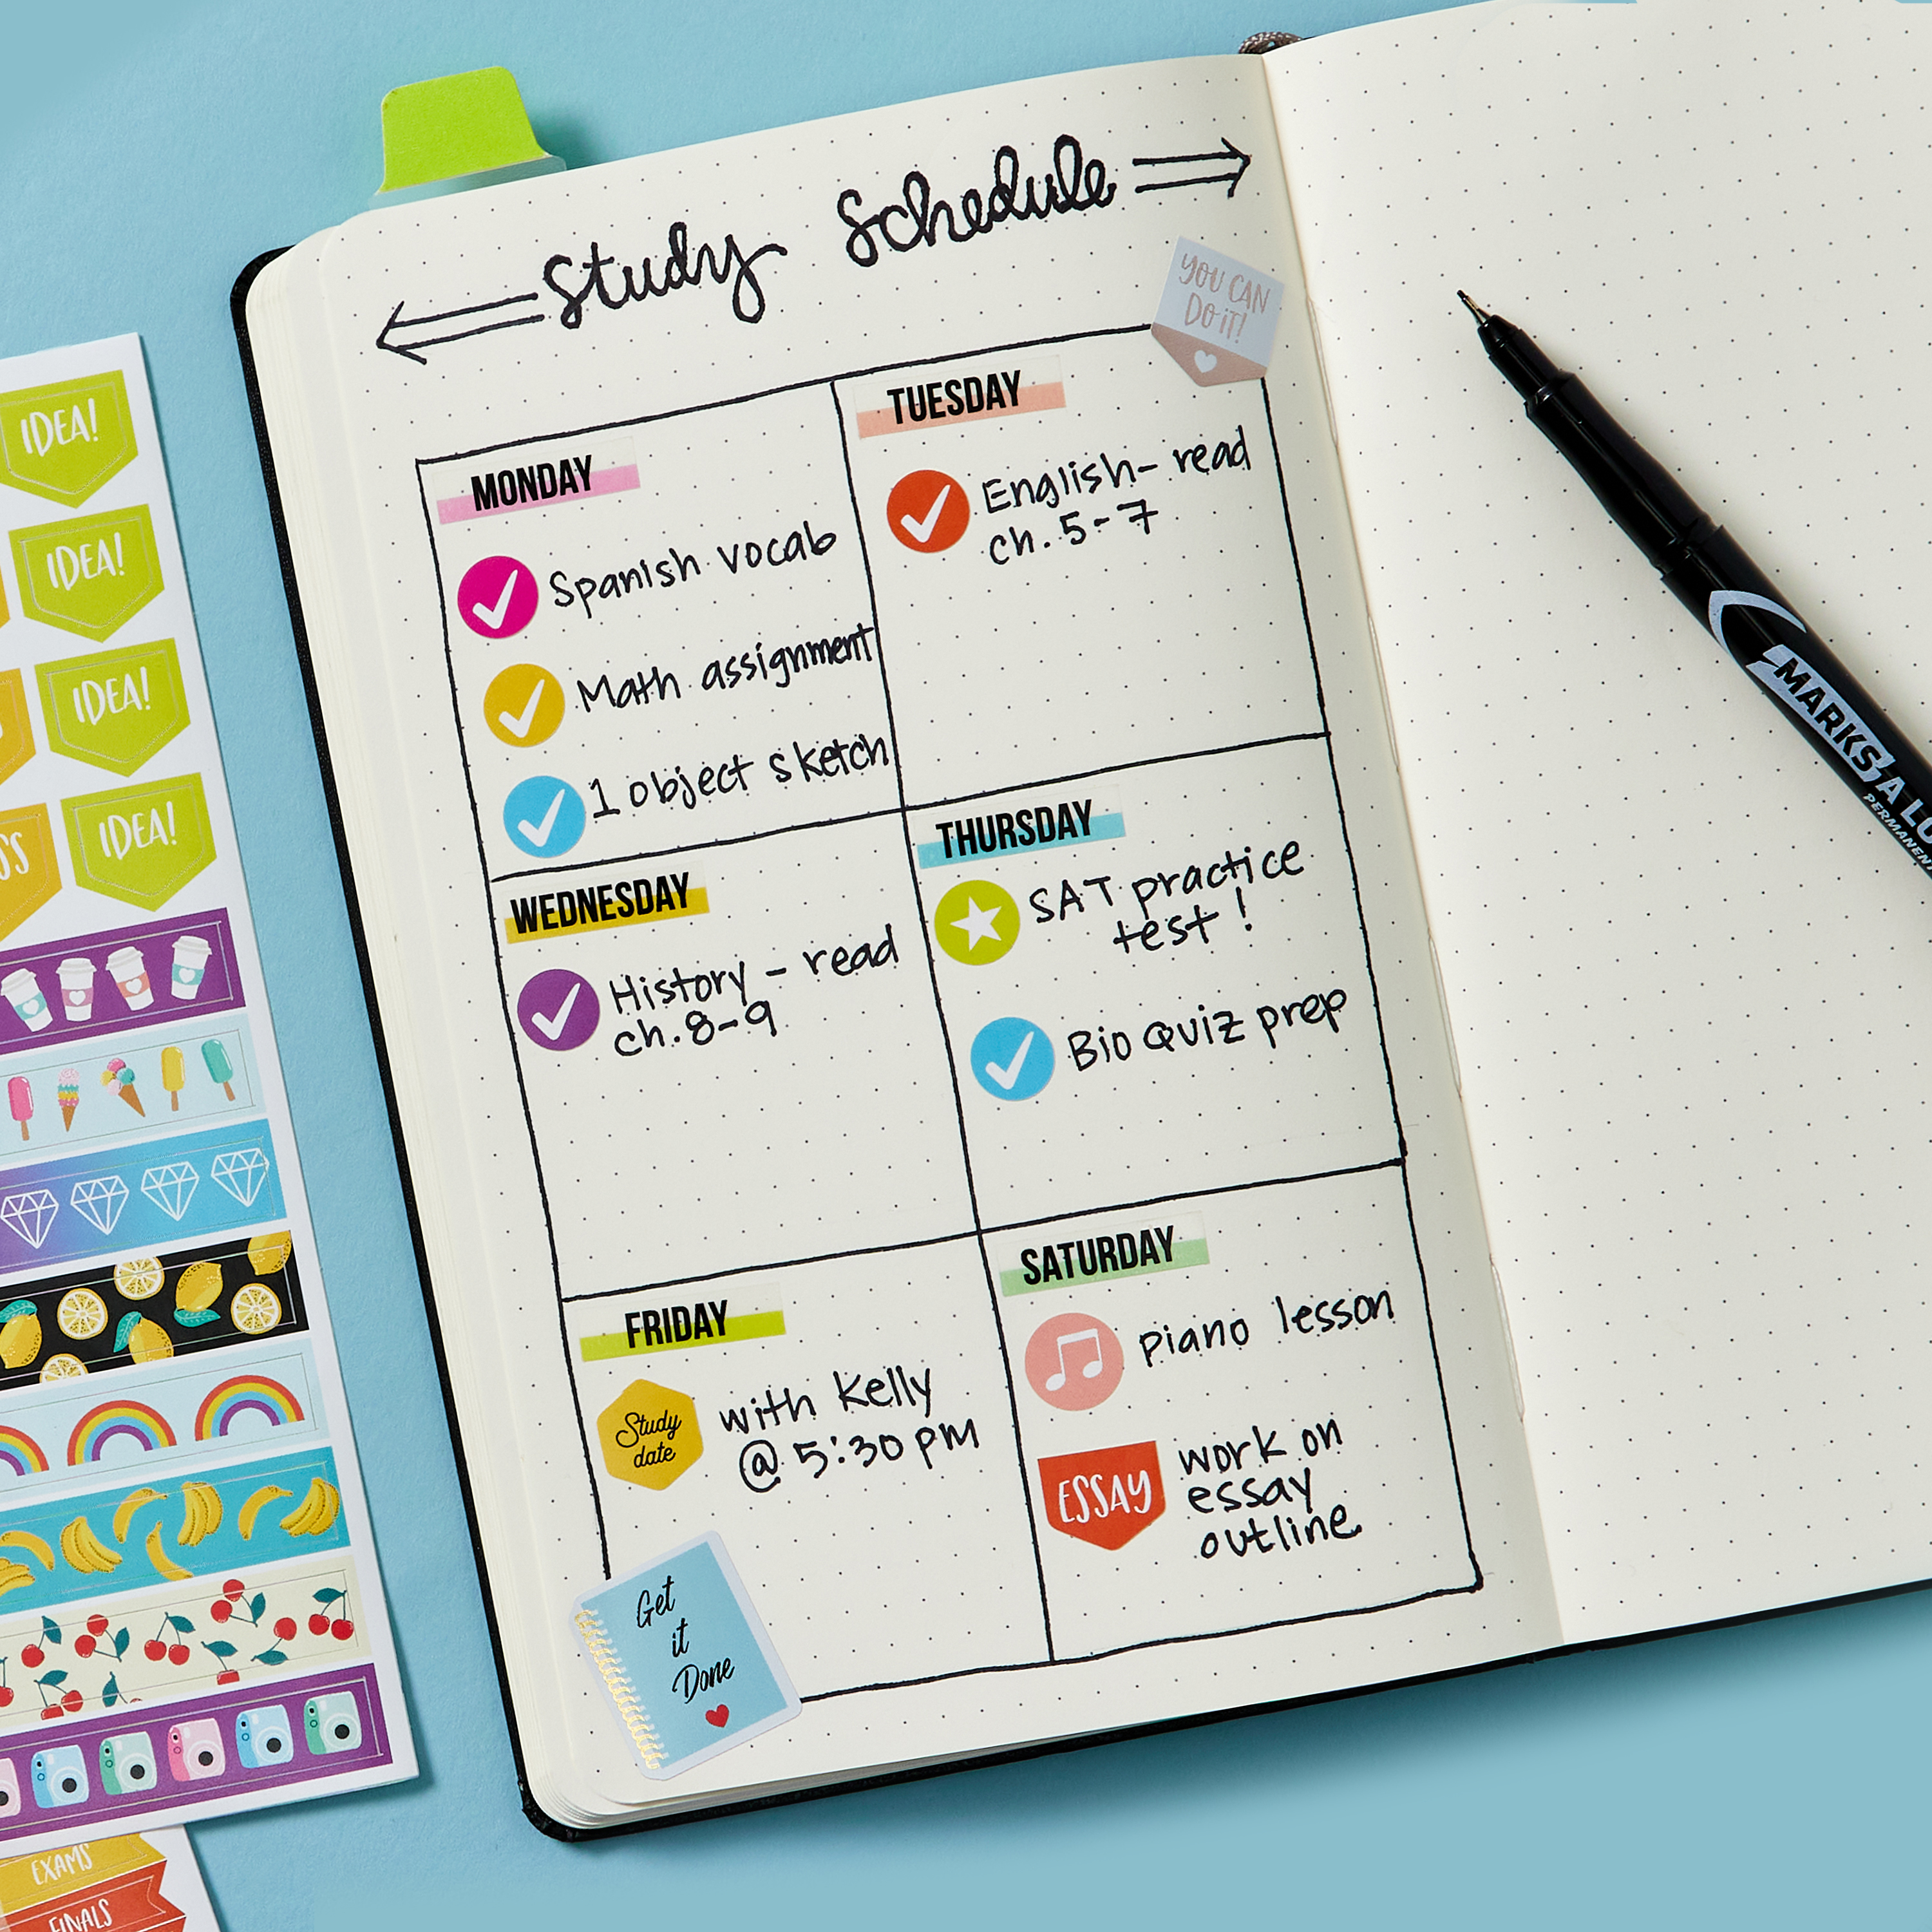 A top-down view of an open bullet journal planner for students. The open page shows an diagram of a study schedule and demonstrates the use of Avery Ultra Tabs and planner stickers.